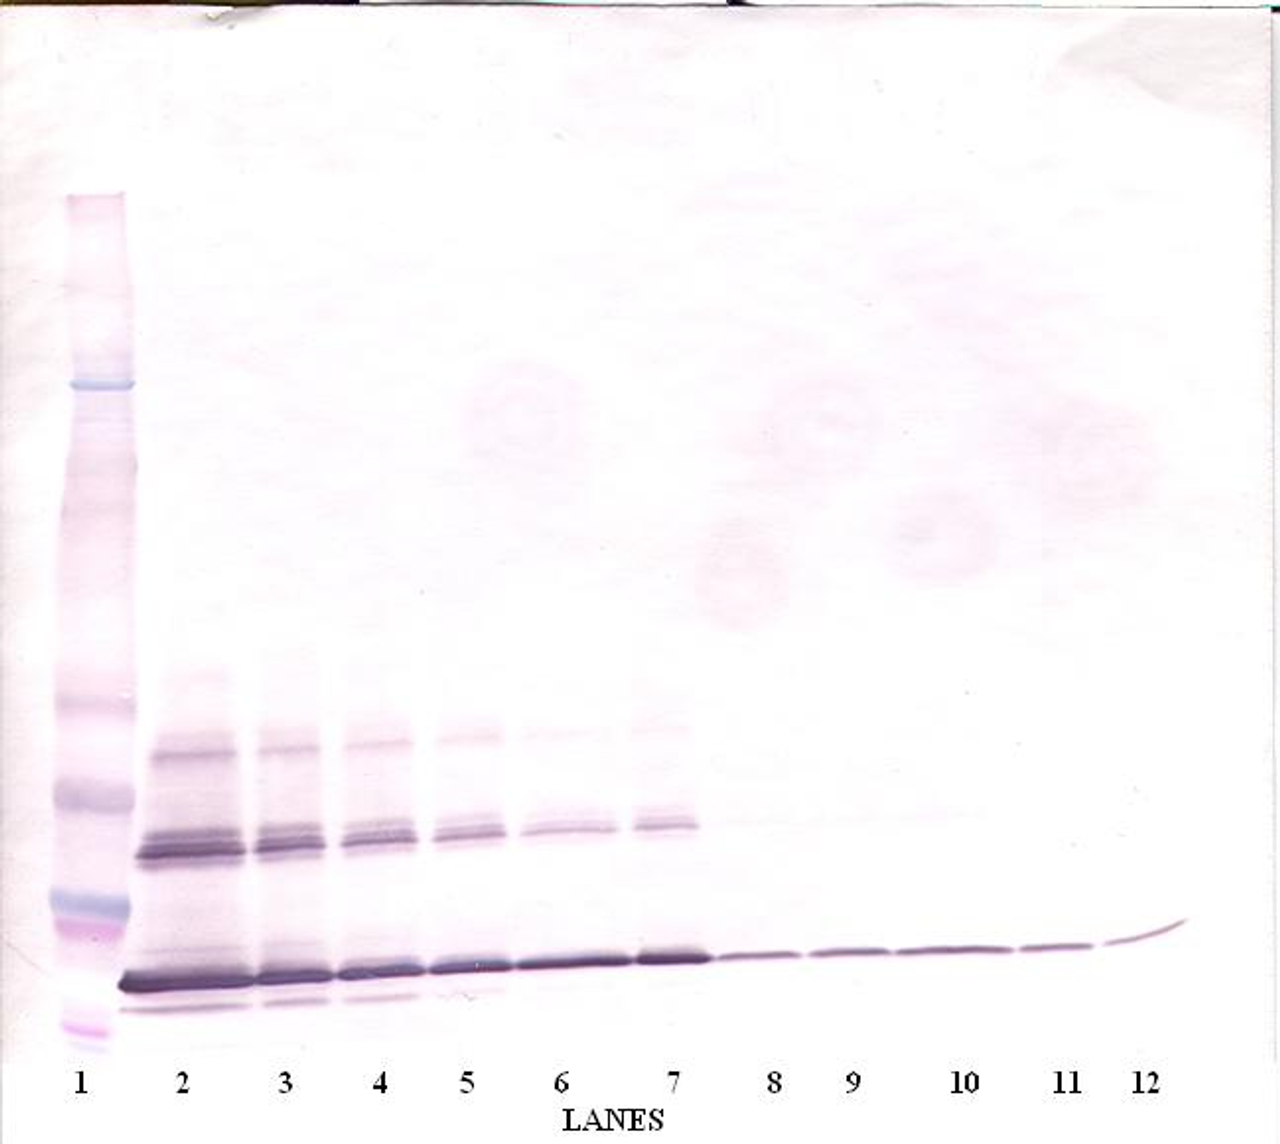 To detect hsCD40L by Western Blot analysis this antibody can be used at a concentration of 0.1 - 0.2 ug/ml. Used in conjunction with compatible secondary reagents the detection limit for recombinant hsCD40L is 1.5 - 3.0 ng/lane, under either reducing or non-reducing conditions.